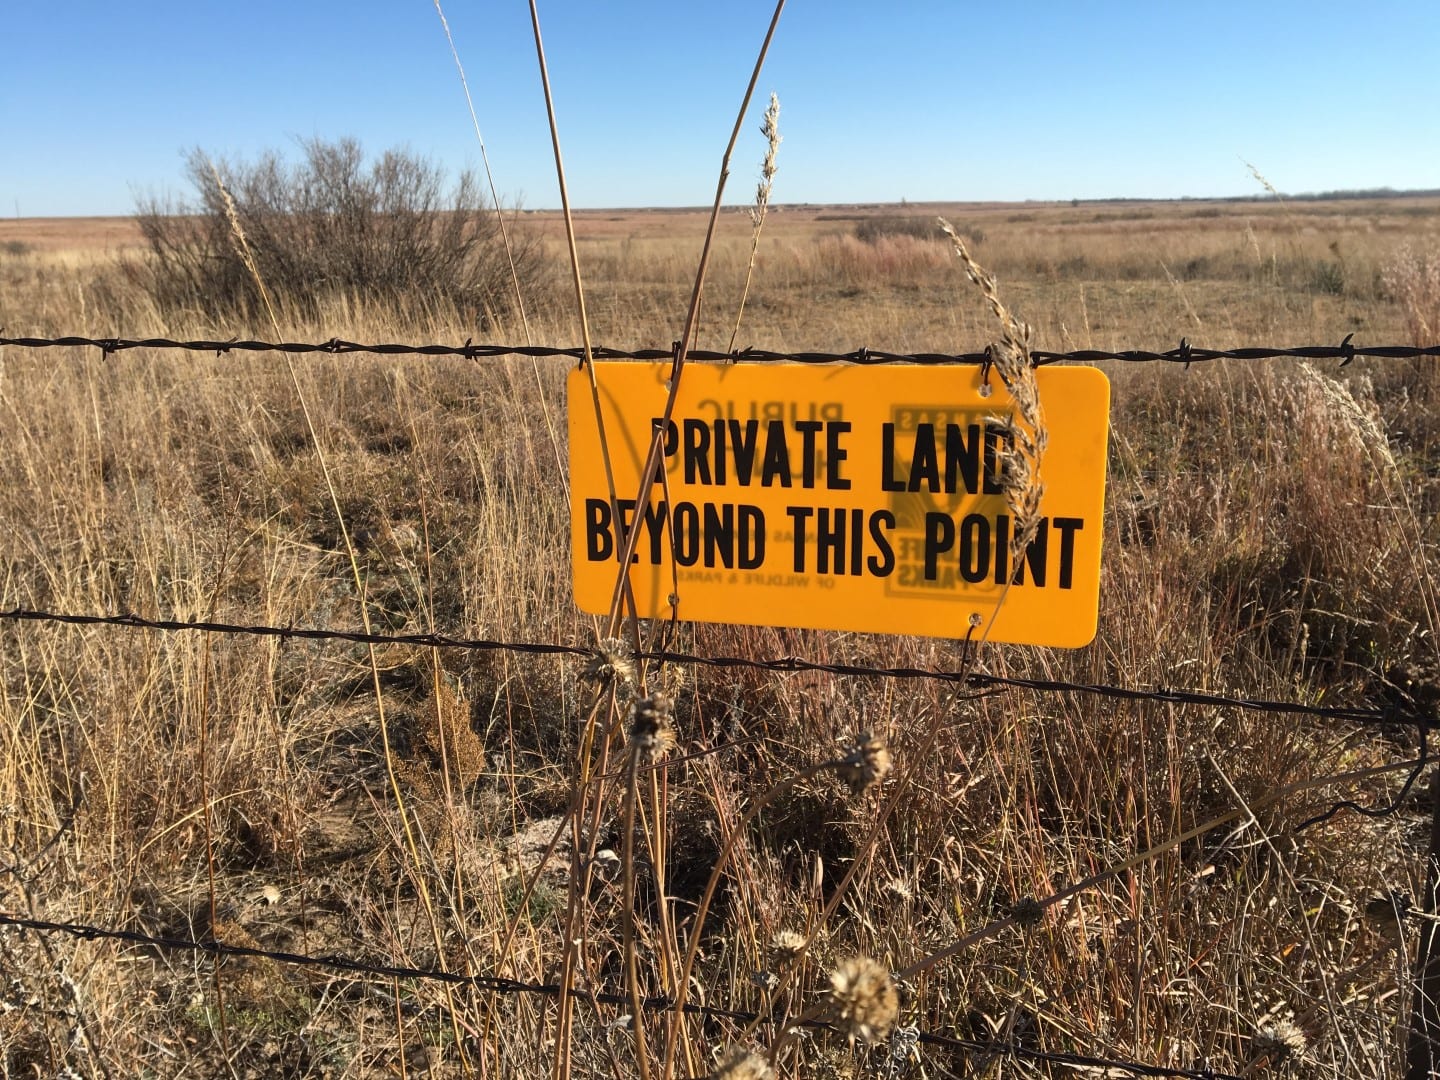 Kansas deer hunting is better on private lands - if you can get permission.